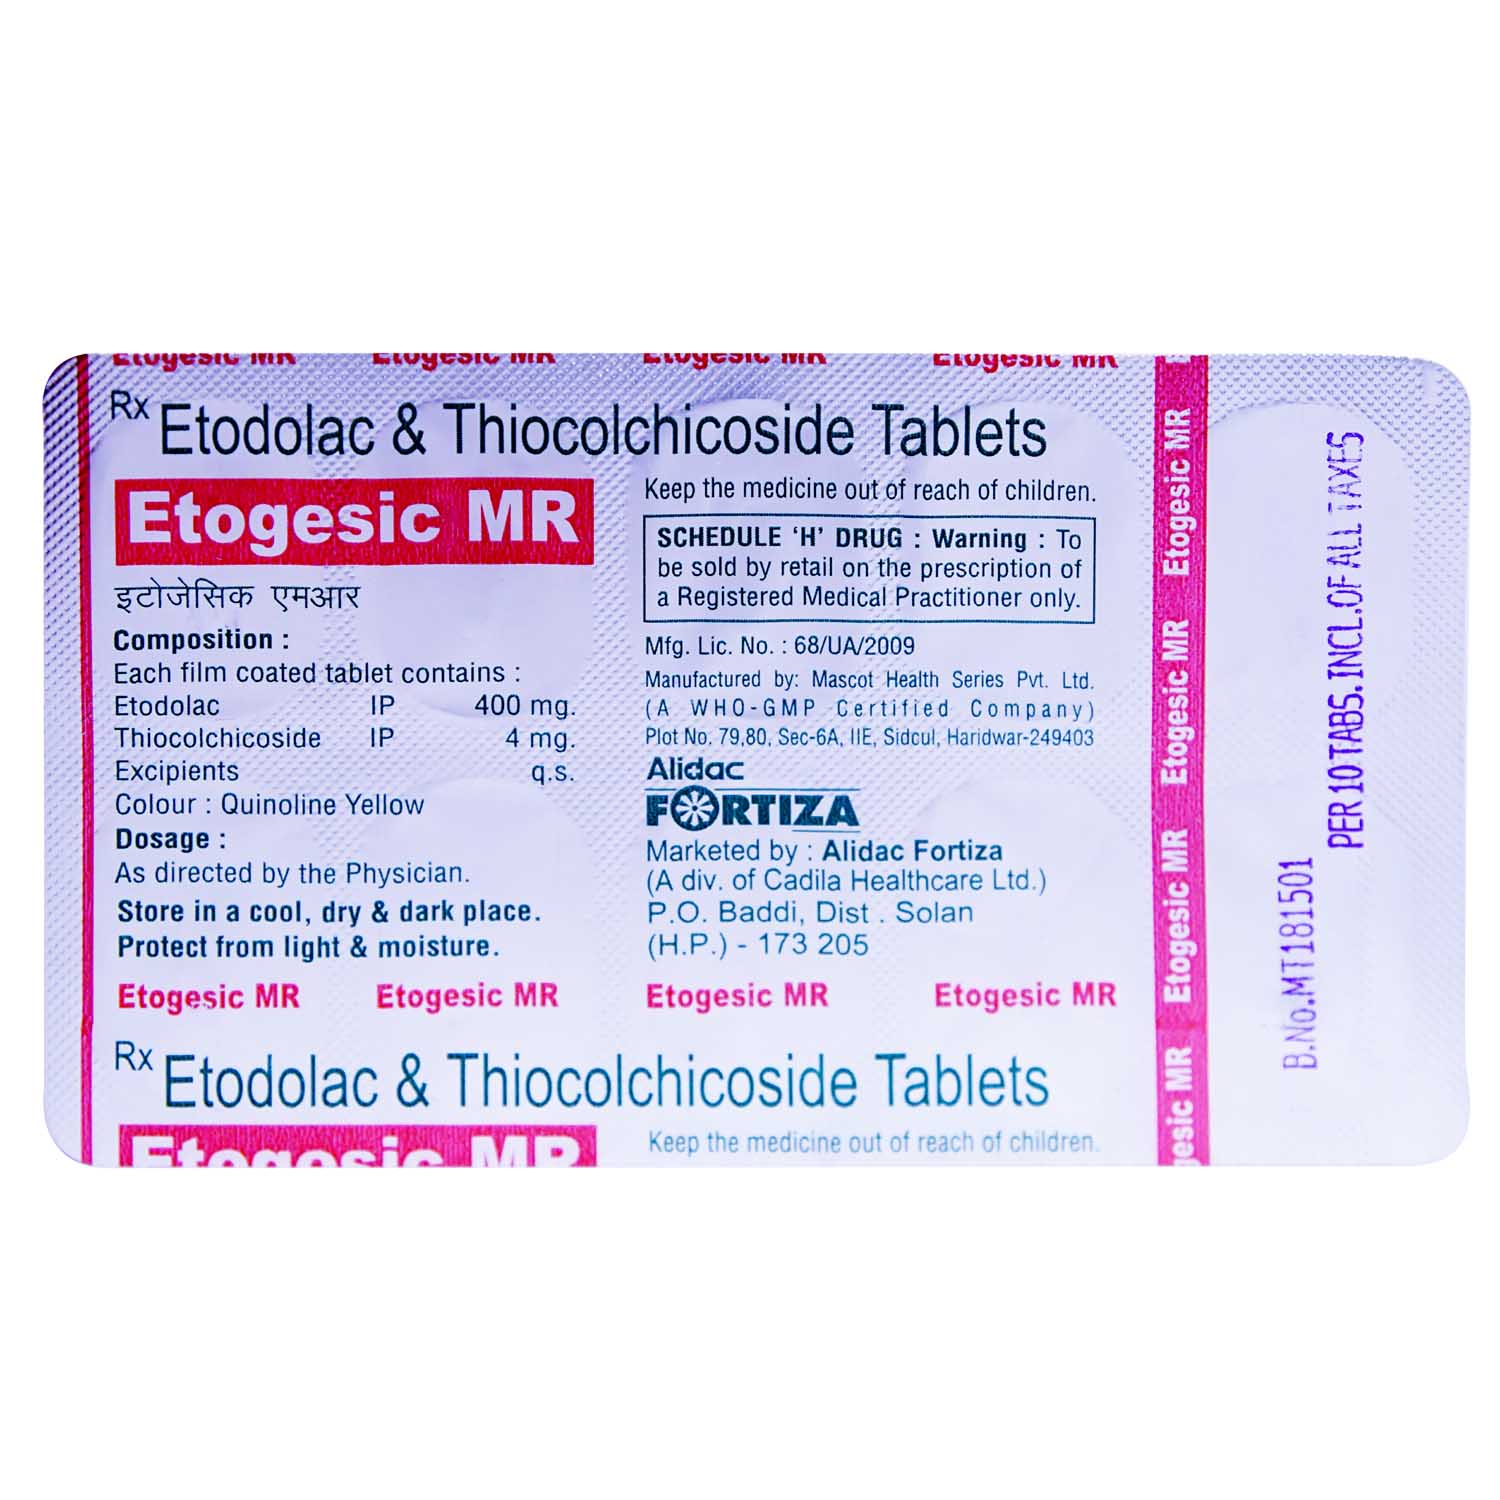 Etogesic Mr Tablet Price Uses Side Effects Composition Apollo Pharmacy